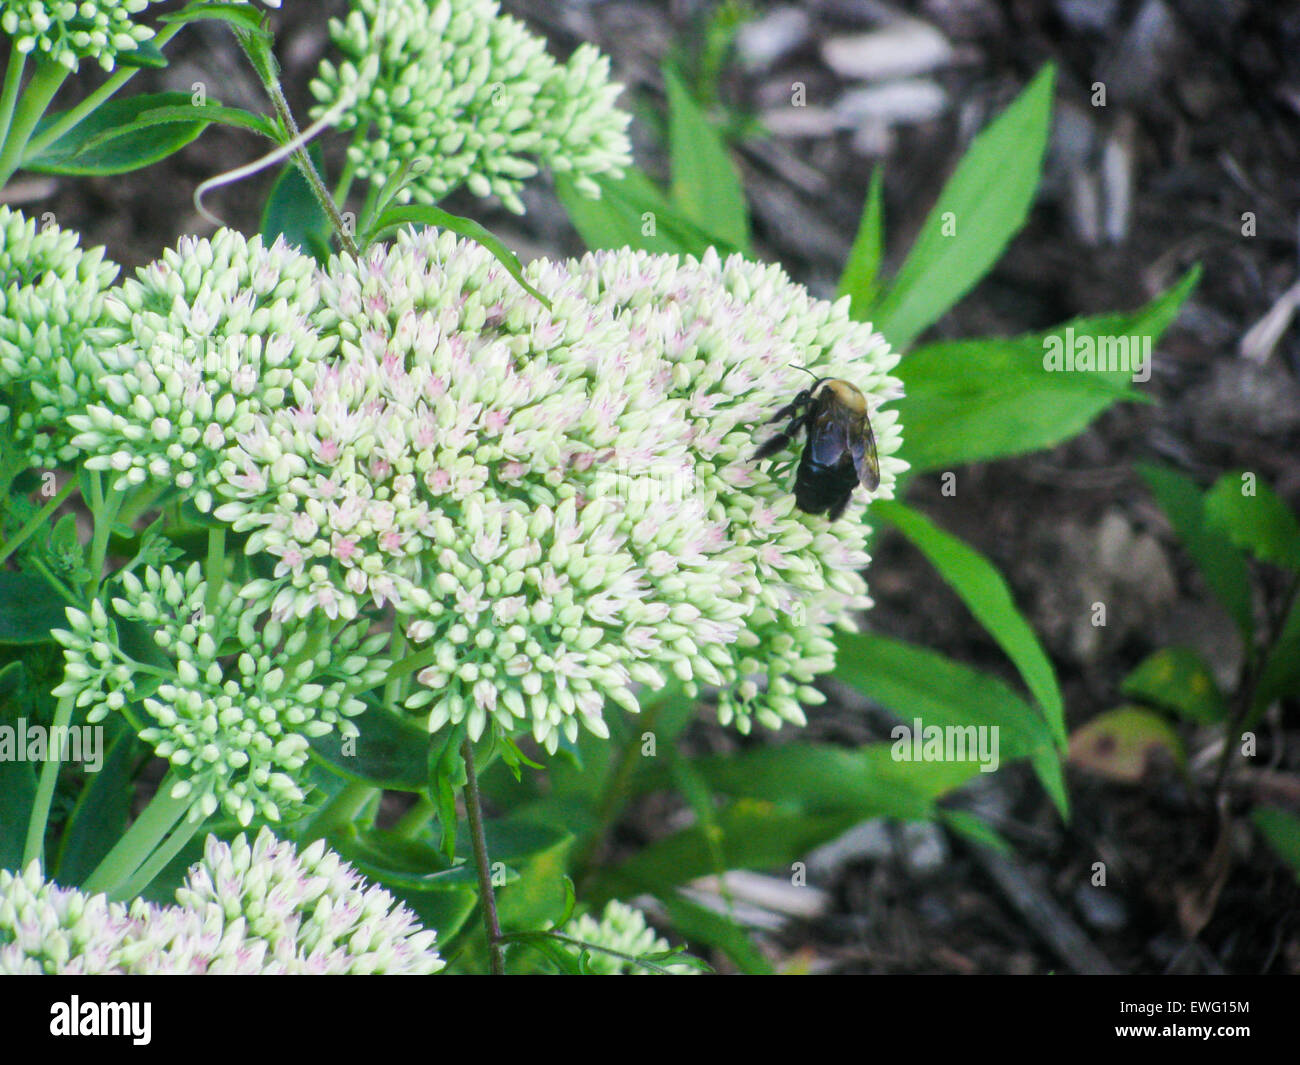 Bee Collecting Nectar from White Flowers Stock Photo